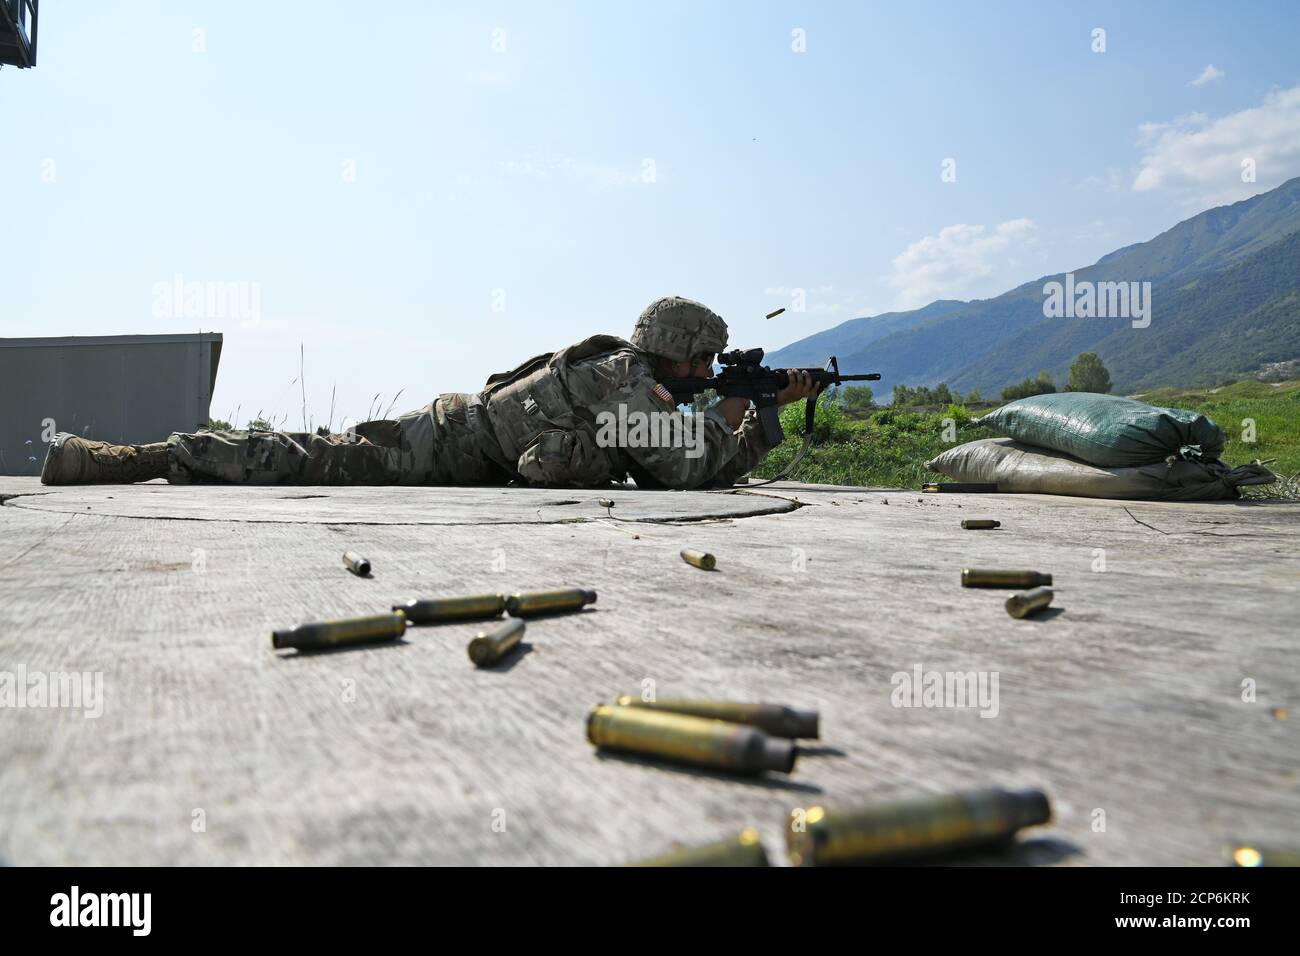 A U.S. Army Paratrooper assigned to 173rd Brigade Support Battalion, 173rd Airborne Brigade, fire with M4 carbine in the prone position during the marksmanship training under Covid-19 prevention condition at Cao Malnisio Range, Pordenone, Italy, Sept. 16, 2020. The 173rd Airborne Brigade is the U.S. Army Contingency Response Force in Europe, capable of projecting ready forces anywhere in the U.S. European, Africa or Central Commands' areas of responsibility.  (U.S. Army Photos by Paolo Bovo) Stock Photo